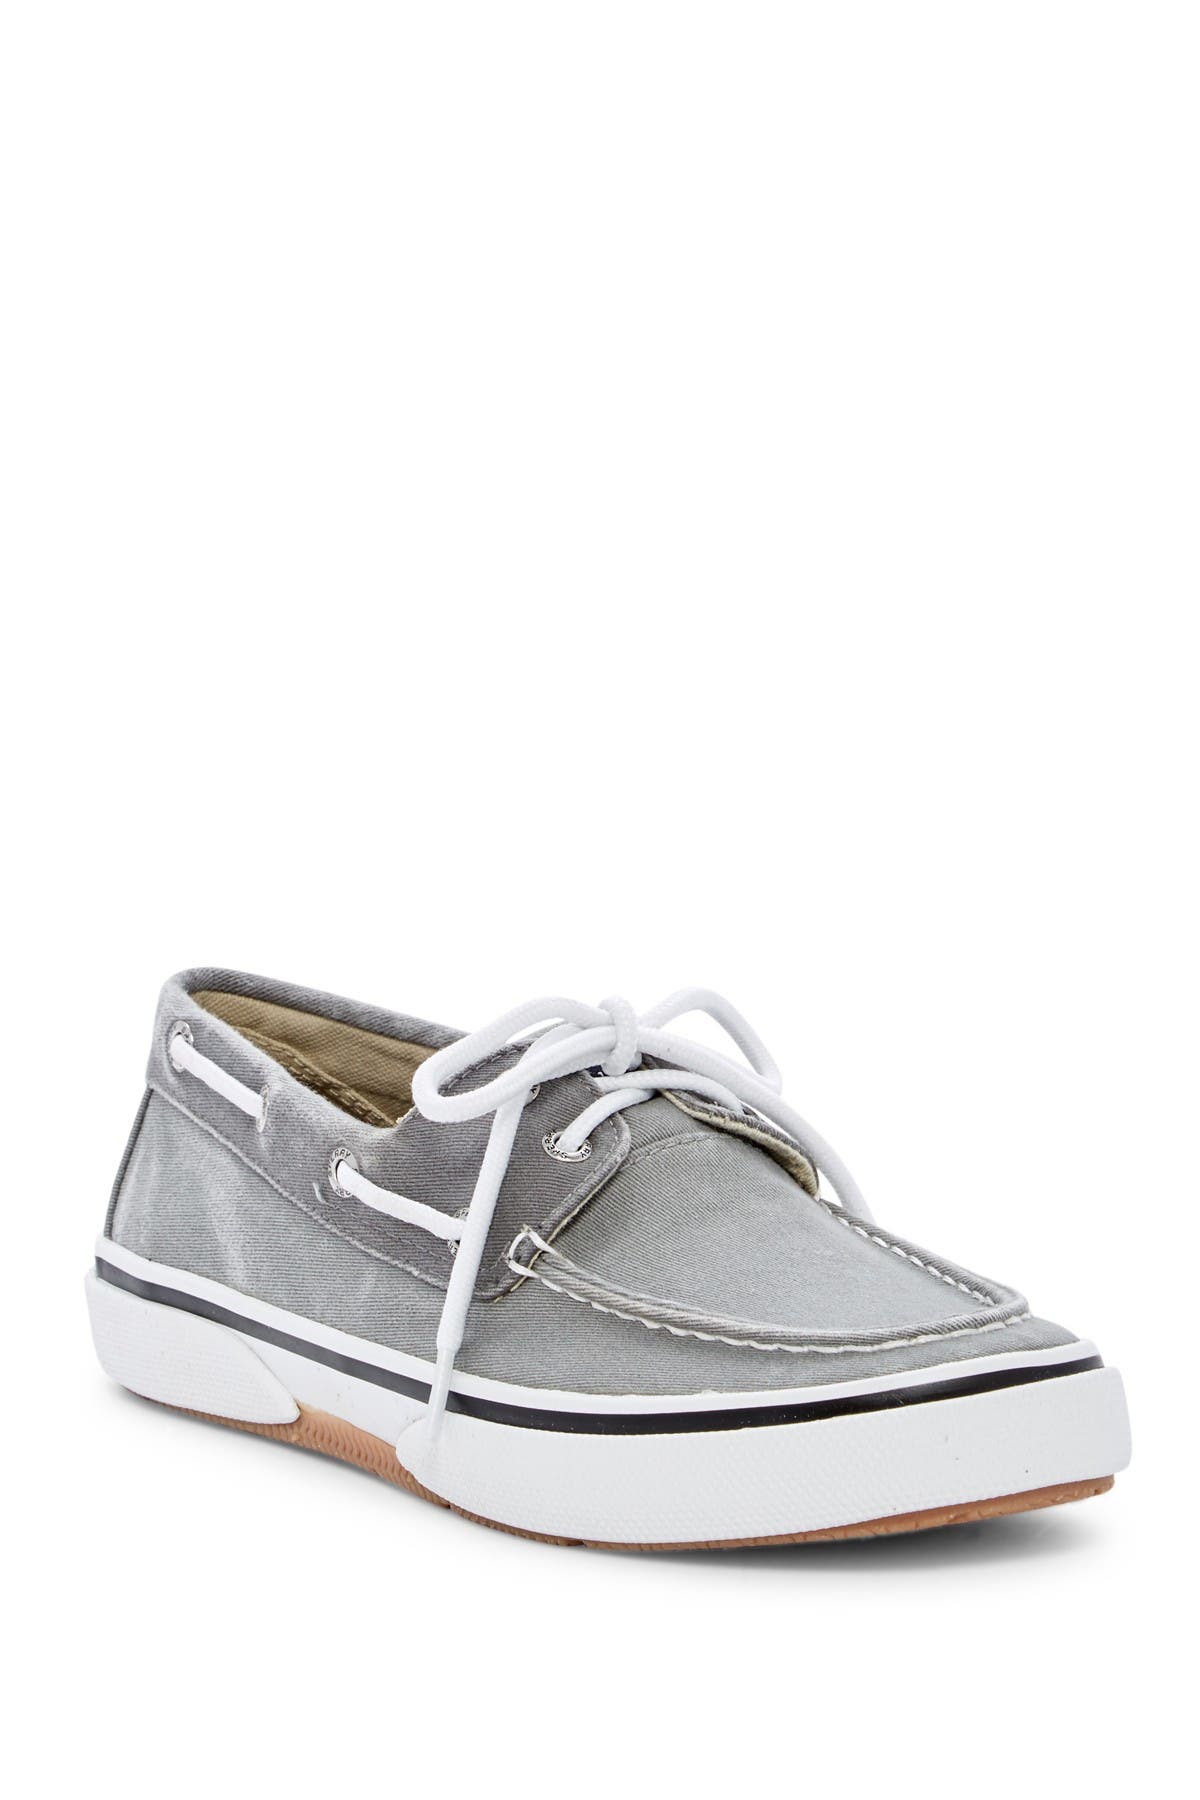 sperry wide boat shoes